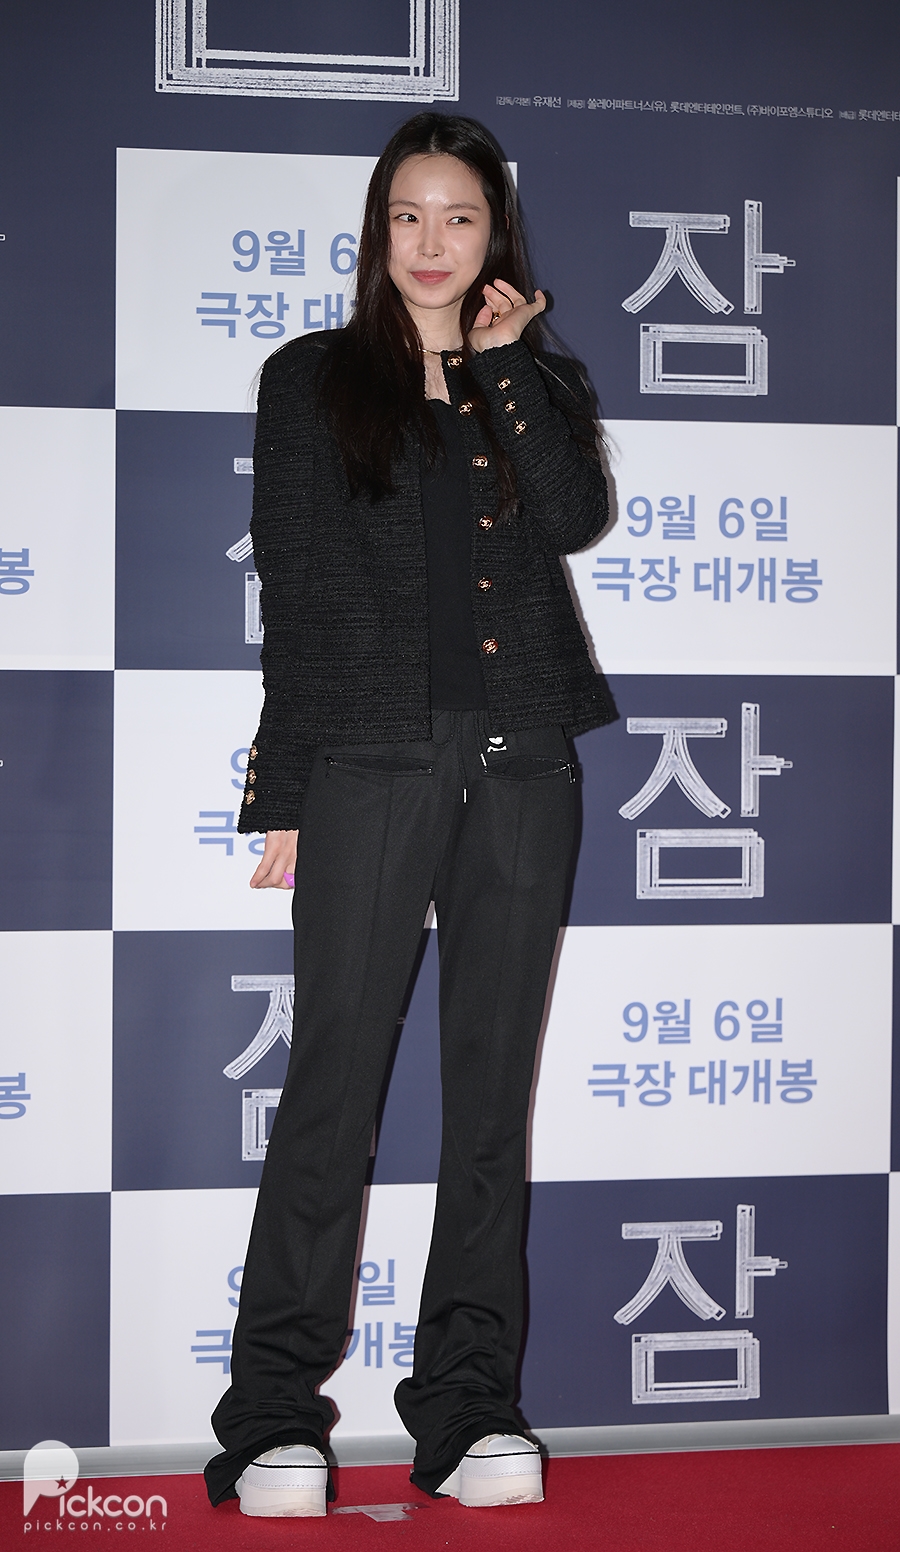 Actress Son Na-eun poses at a preview of Yoo Jae-sun's latest film "Sleep" in Seoul on Monday.